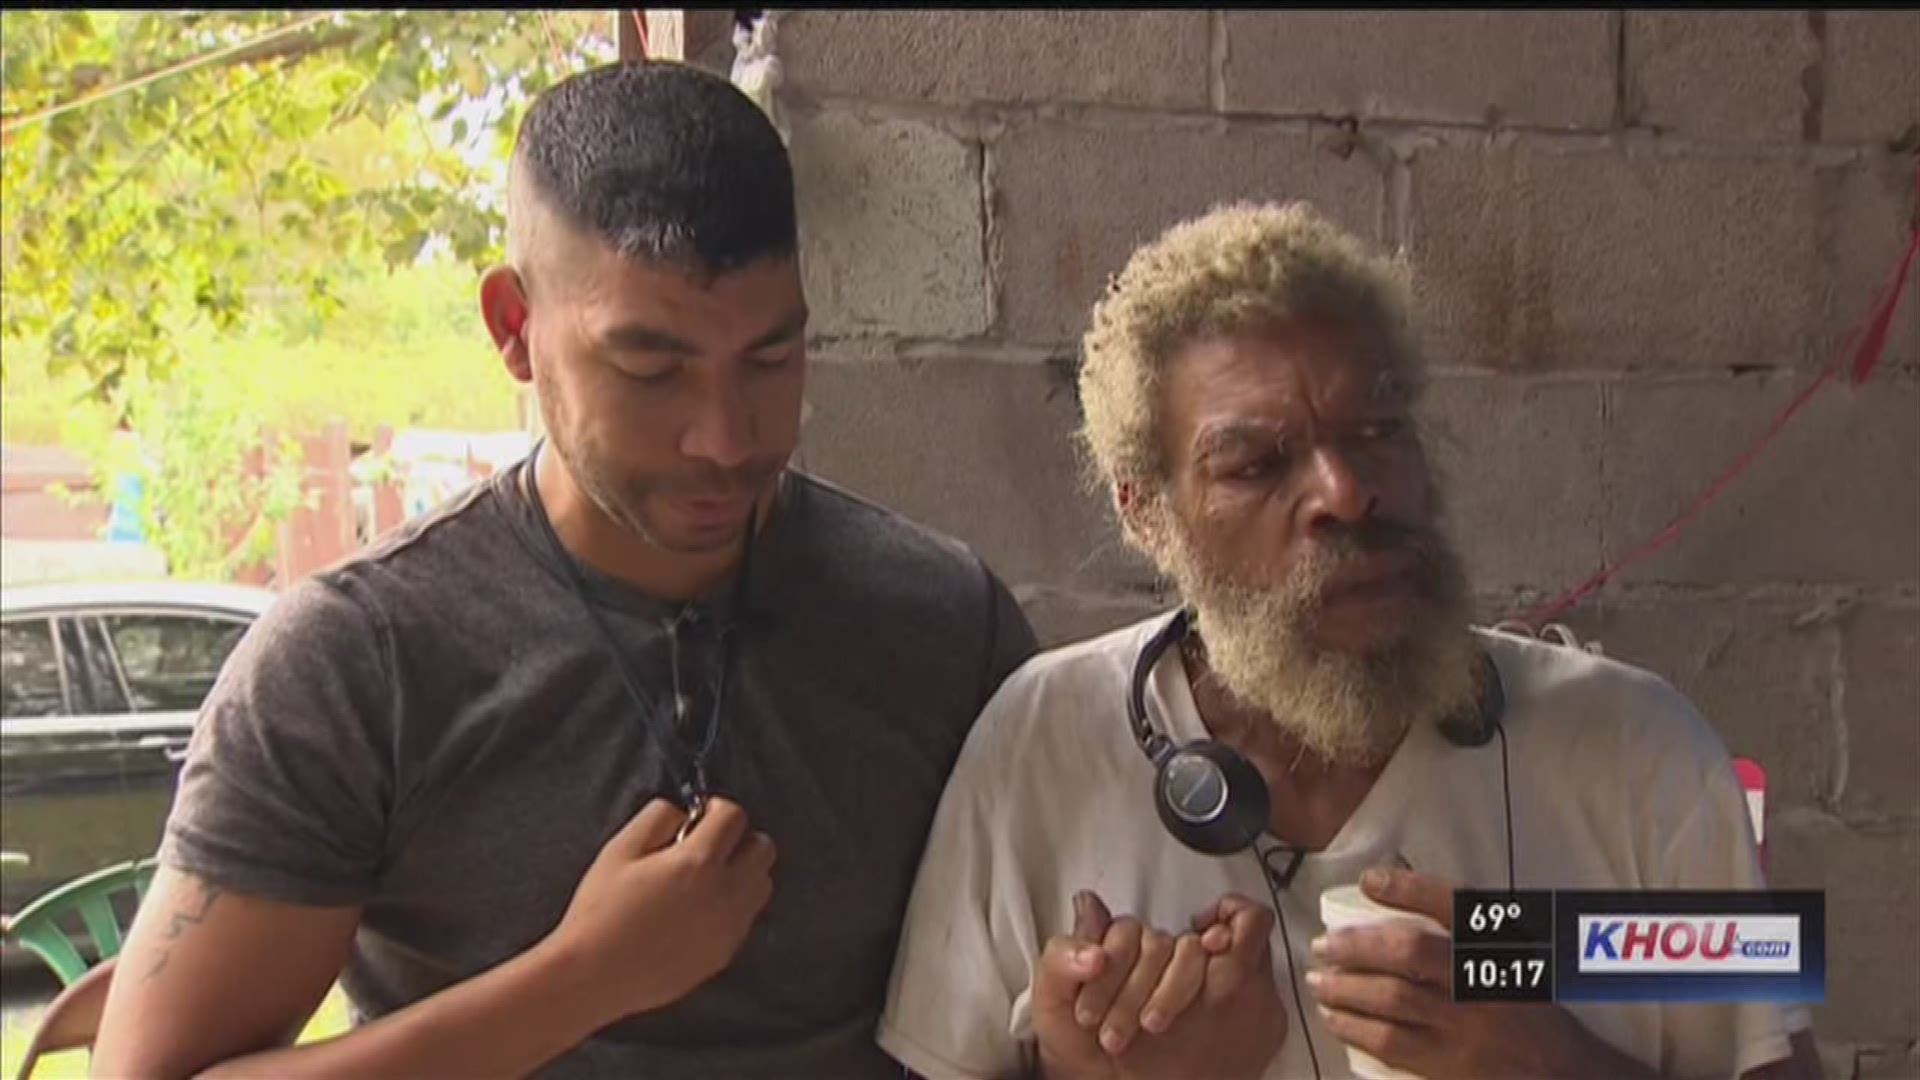 KHOU's Melissa Correa tells the story of how viewers helped reunite a homeless father and his long-lost son.